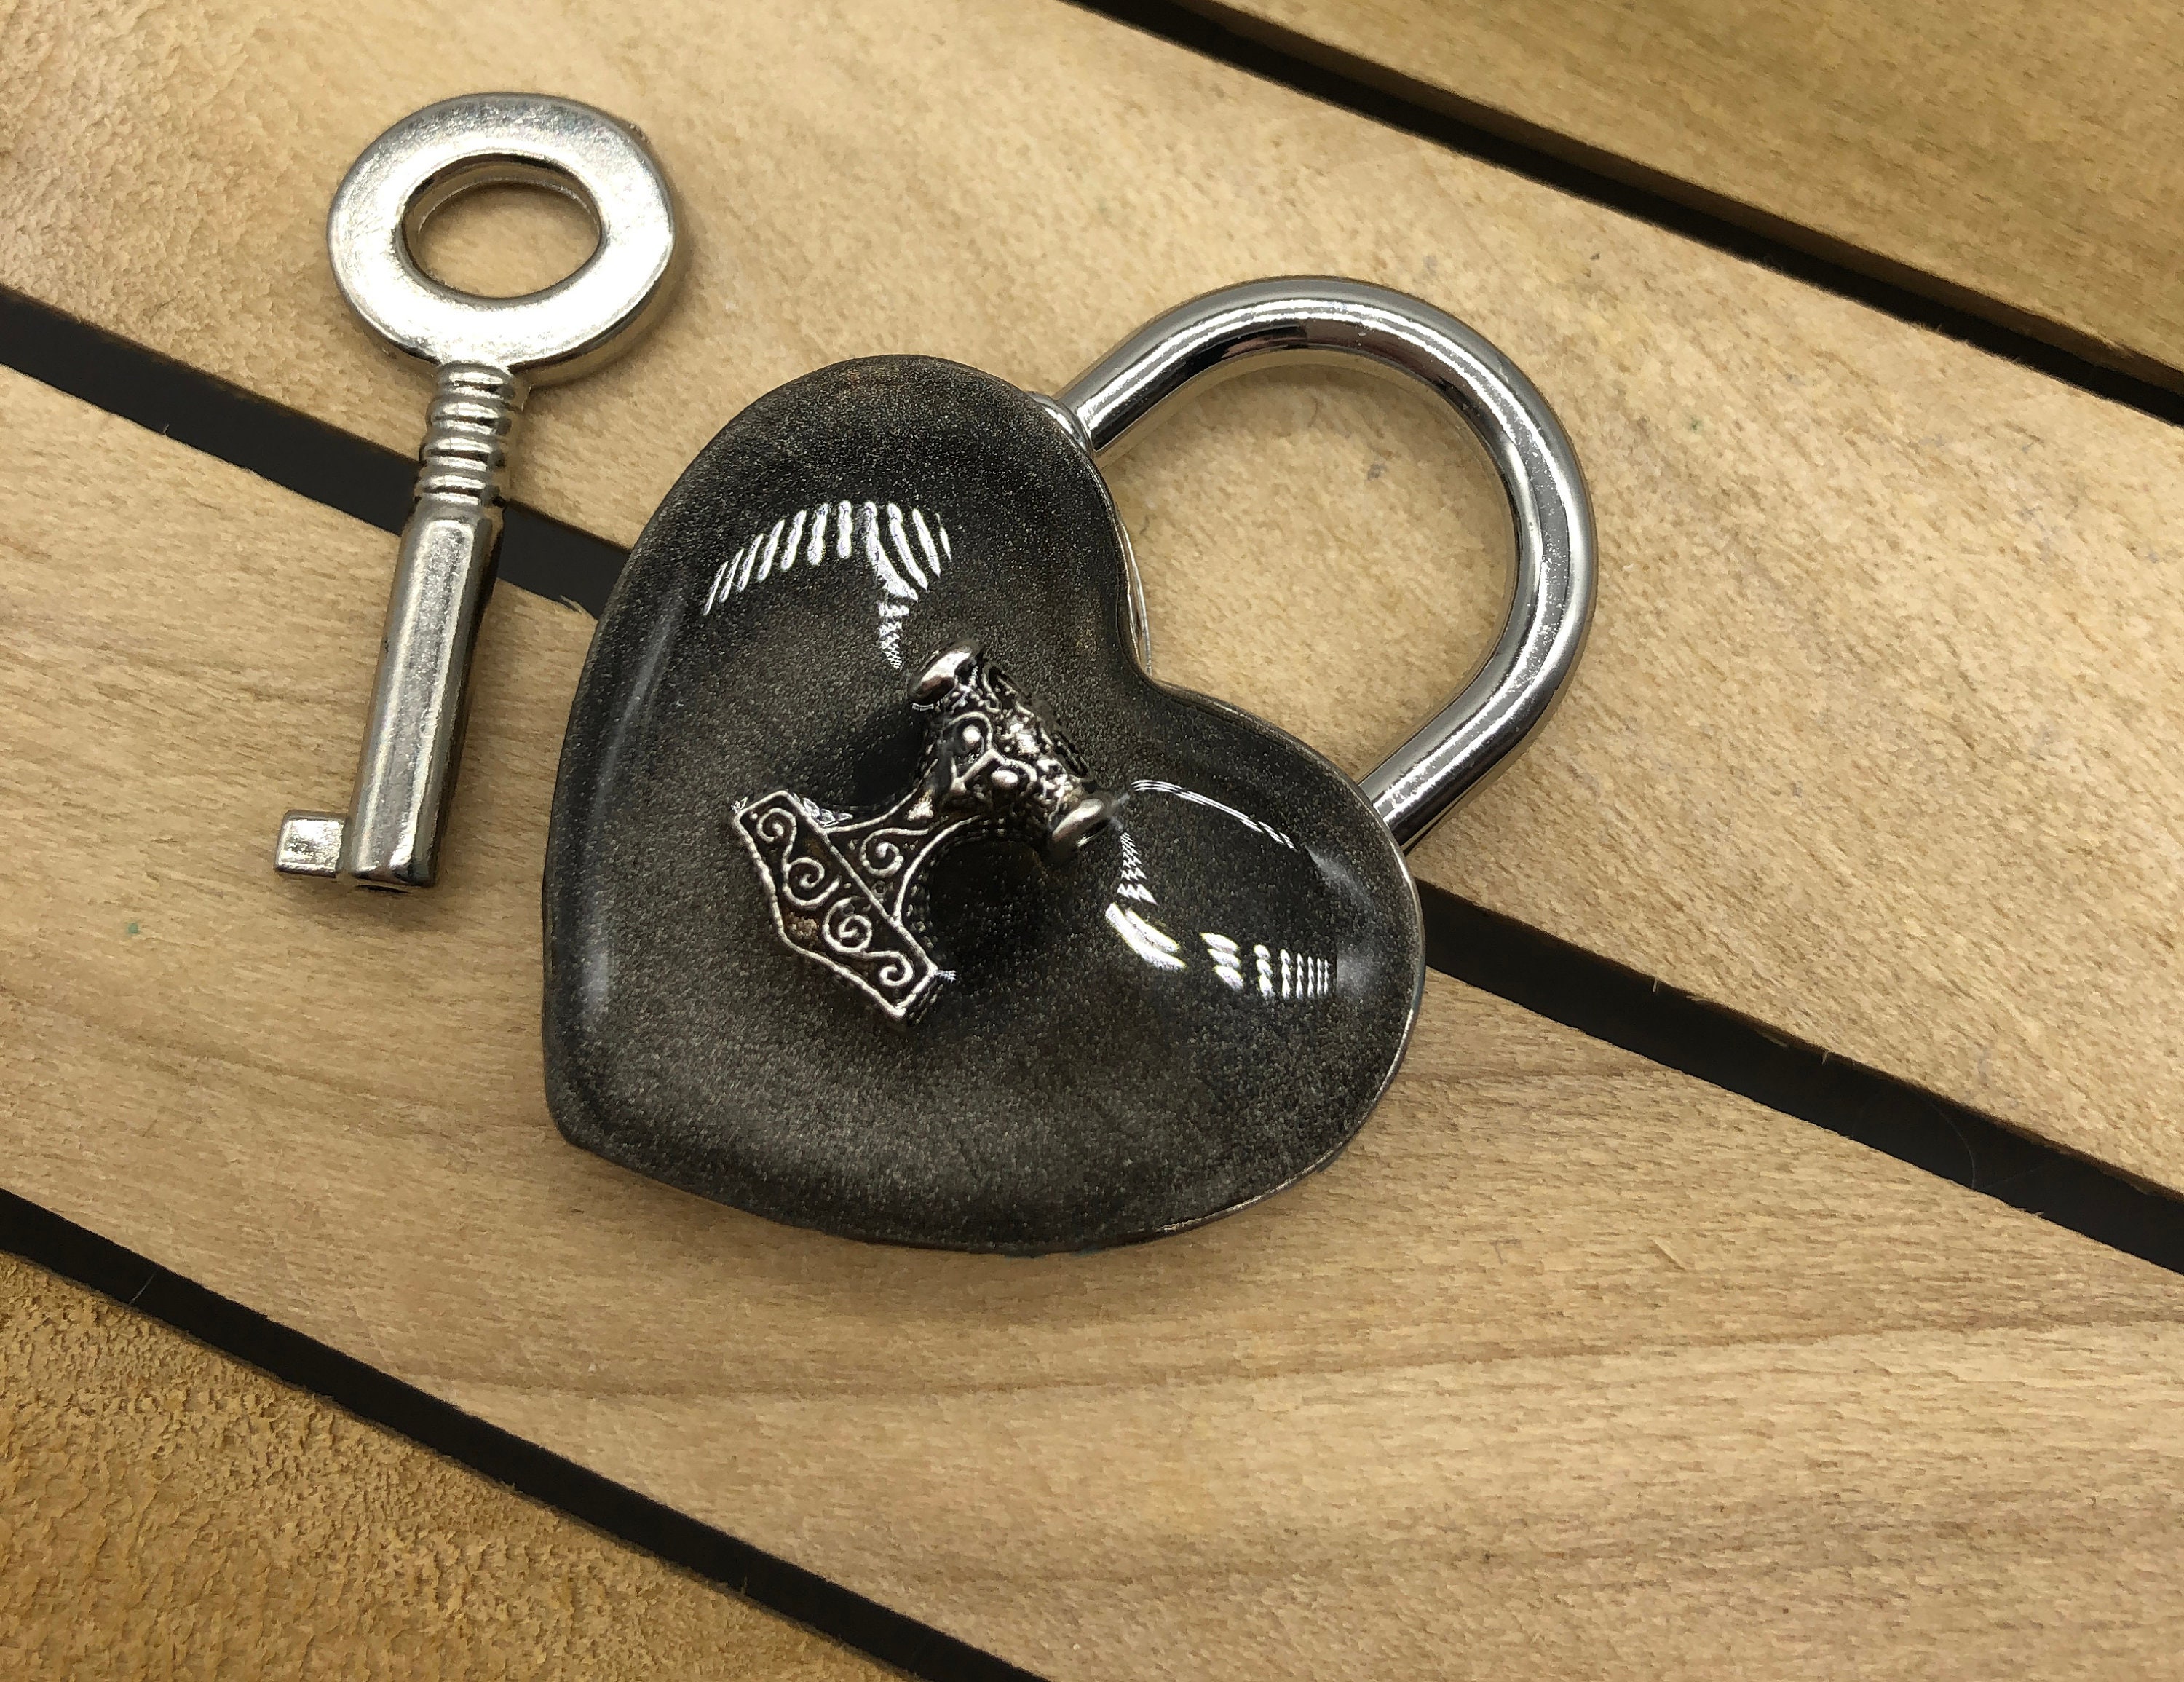 Premium Photo  A heart-shaped lock and key on a pink, glittery